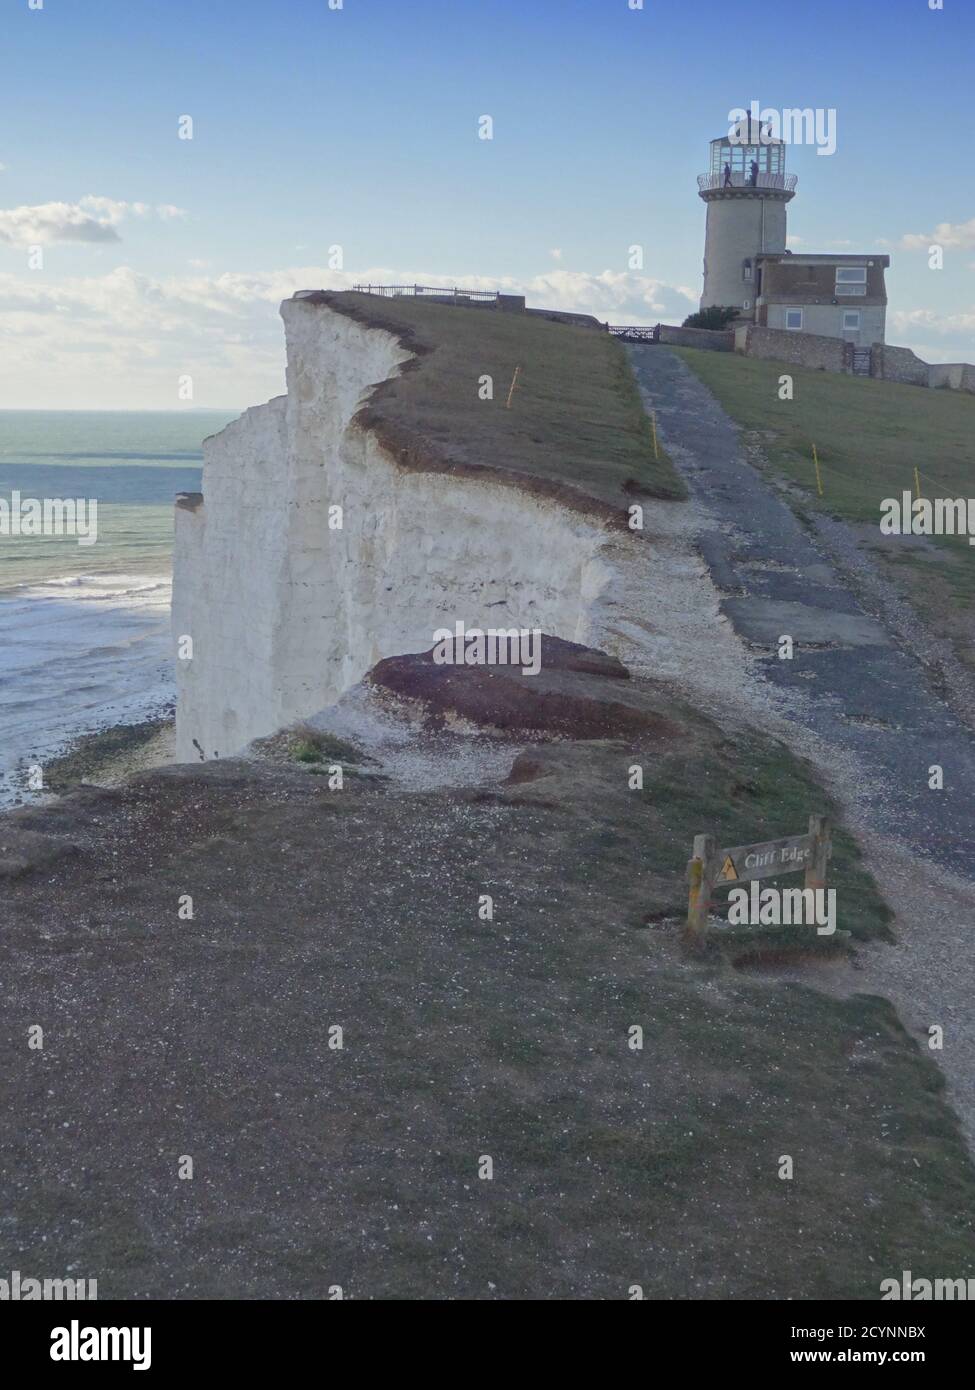 Eastbourne, East Sussex, UK. 25th Sep, 2020. Errosion seems to be accelerating after the heavy rain. The old pathway to the Belle Tout lighthouse now close to the cliff edge. The large fissure, a local walker advised, is widening daily it can not be long before a sizeable chunk crashes to the beach below. Credit: David Burr/Alamy Live News Stock Photo